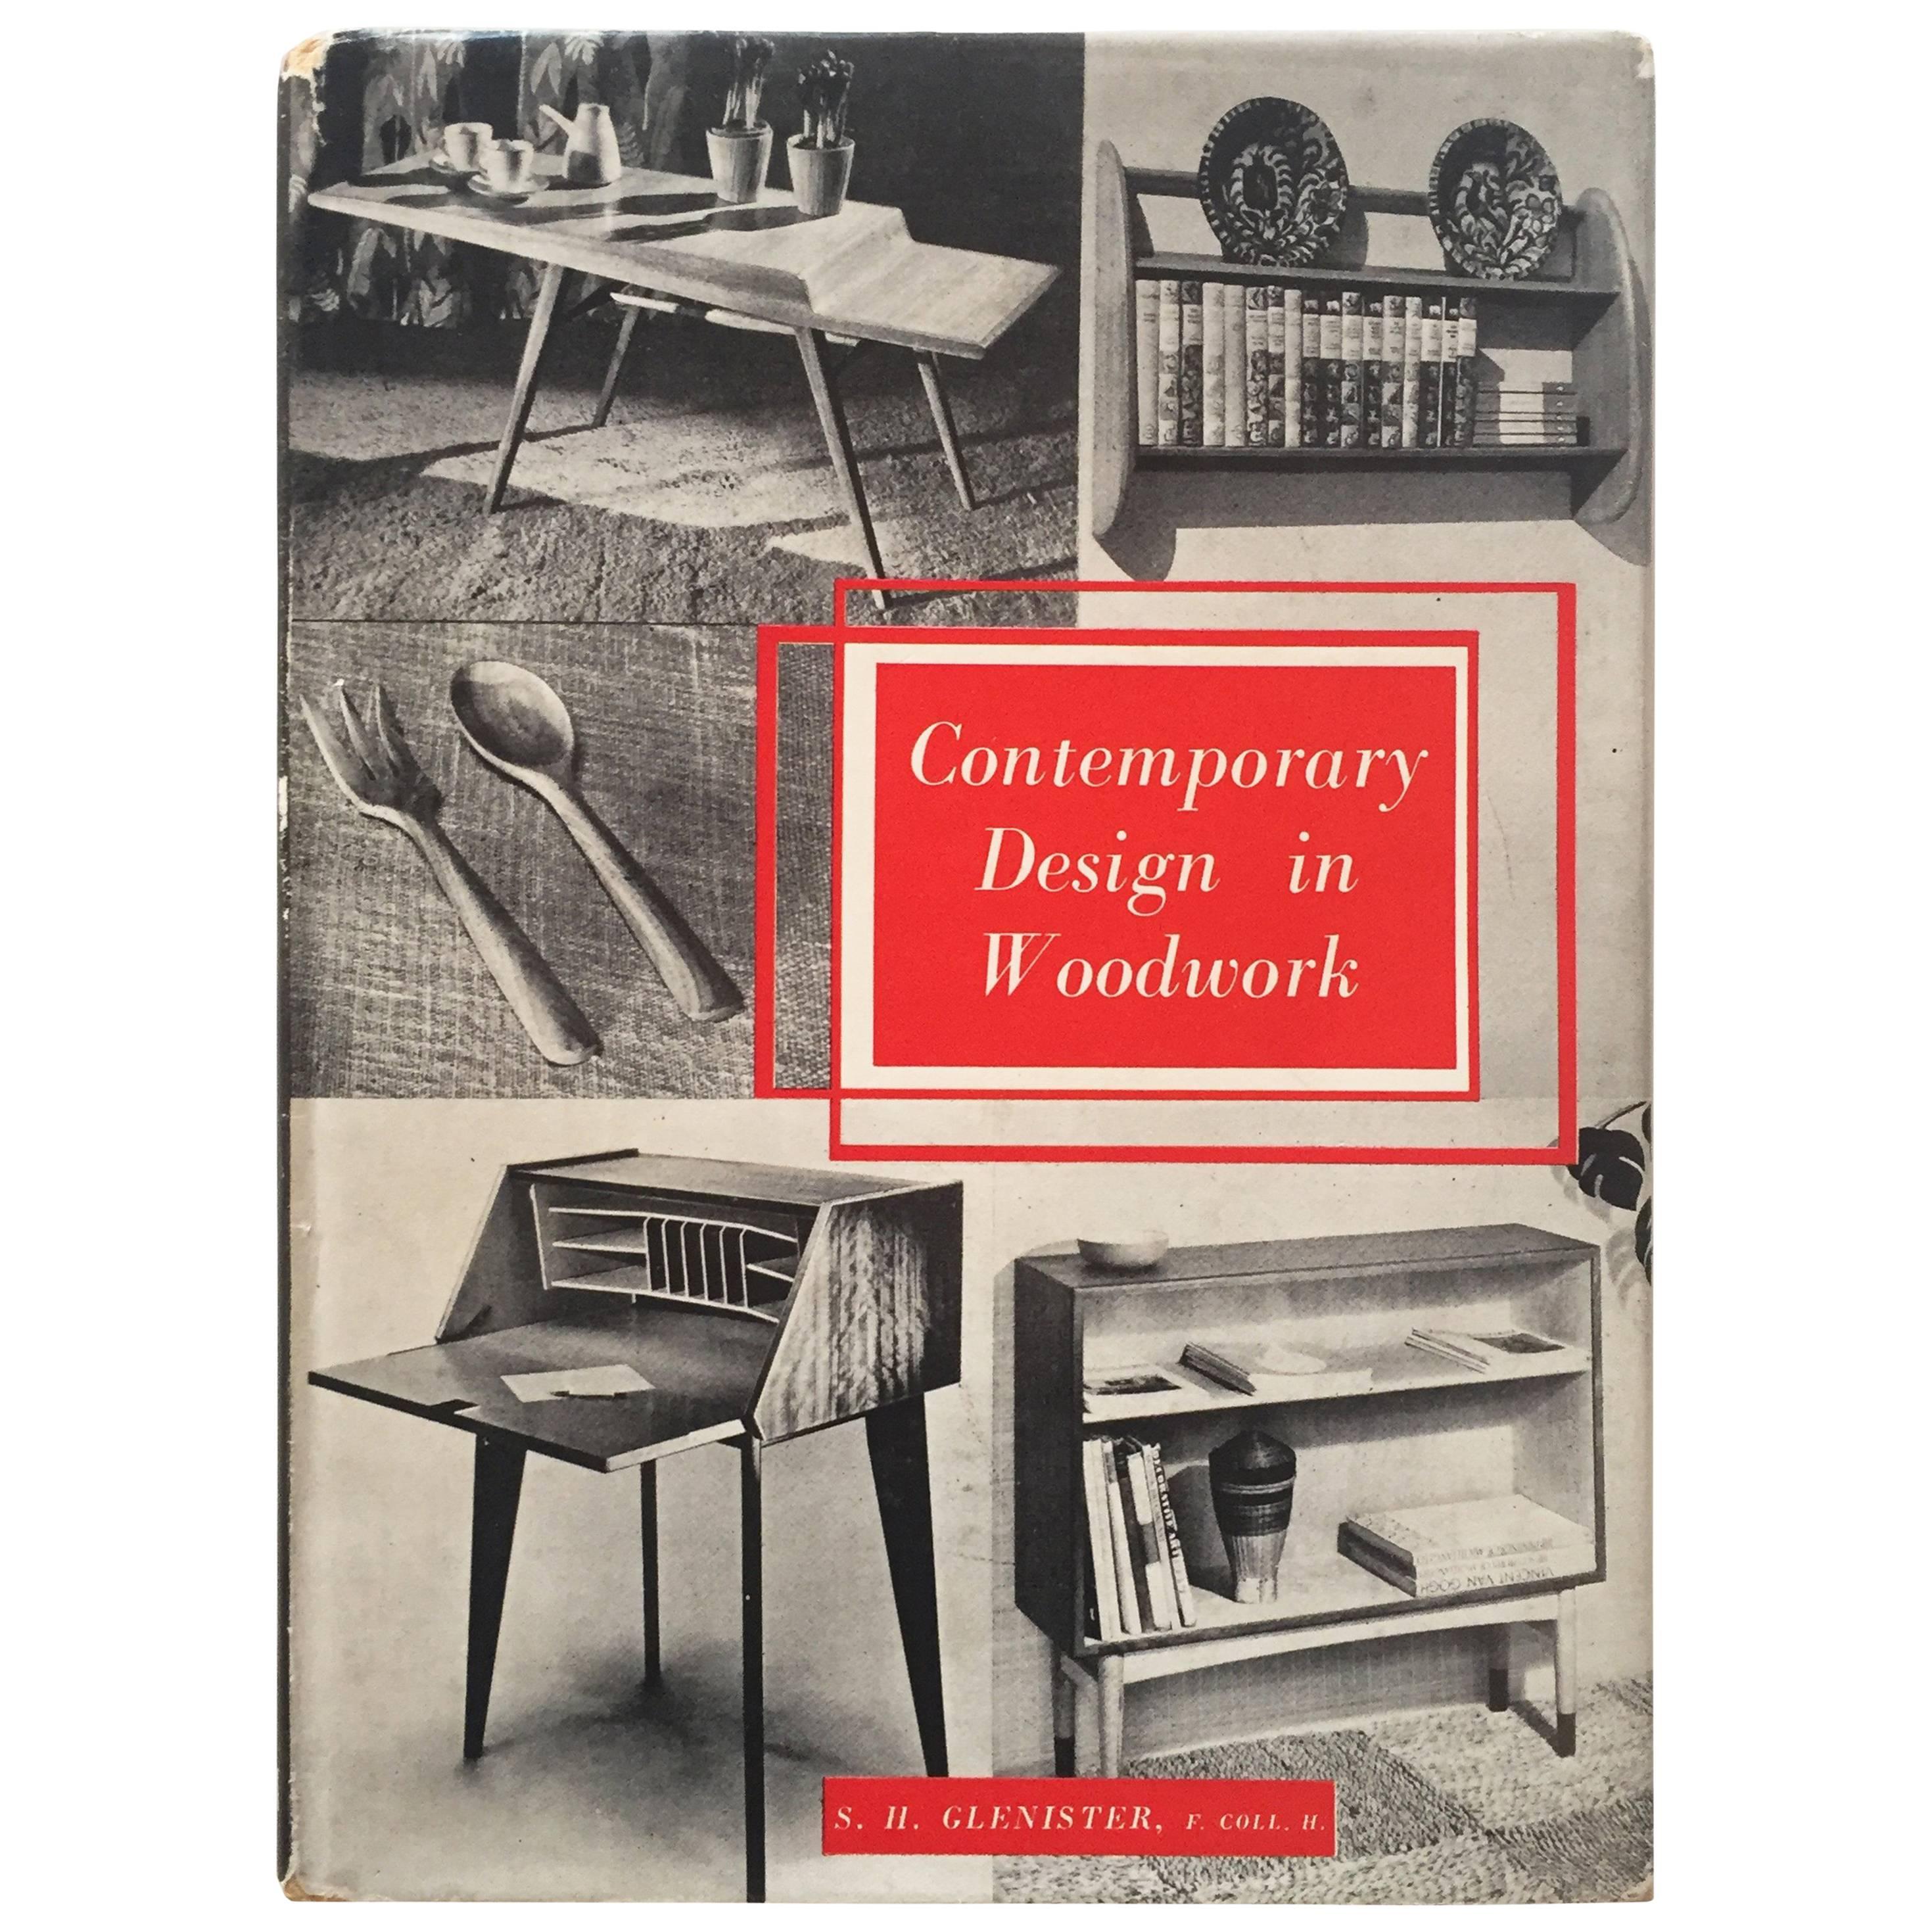 S. H Glenister, Contemporary Design in Woodwork, 1955 For Sale